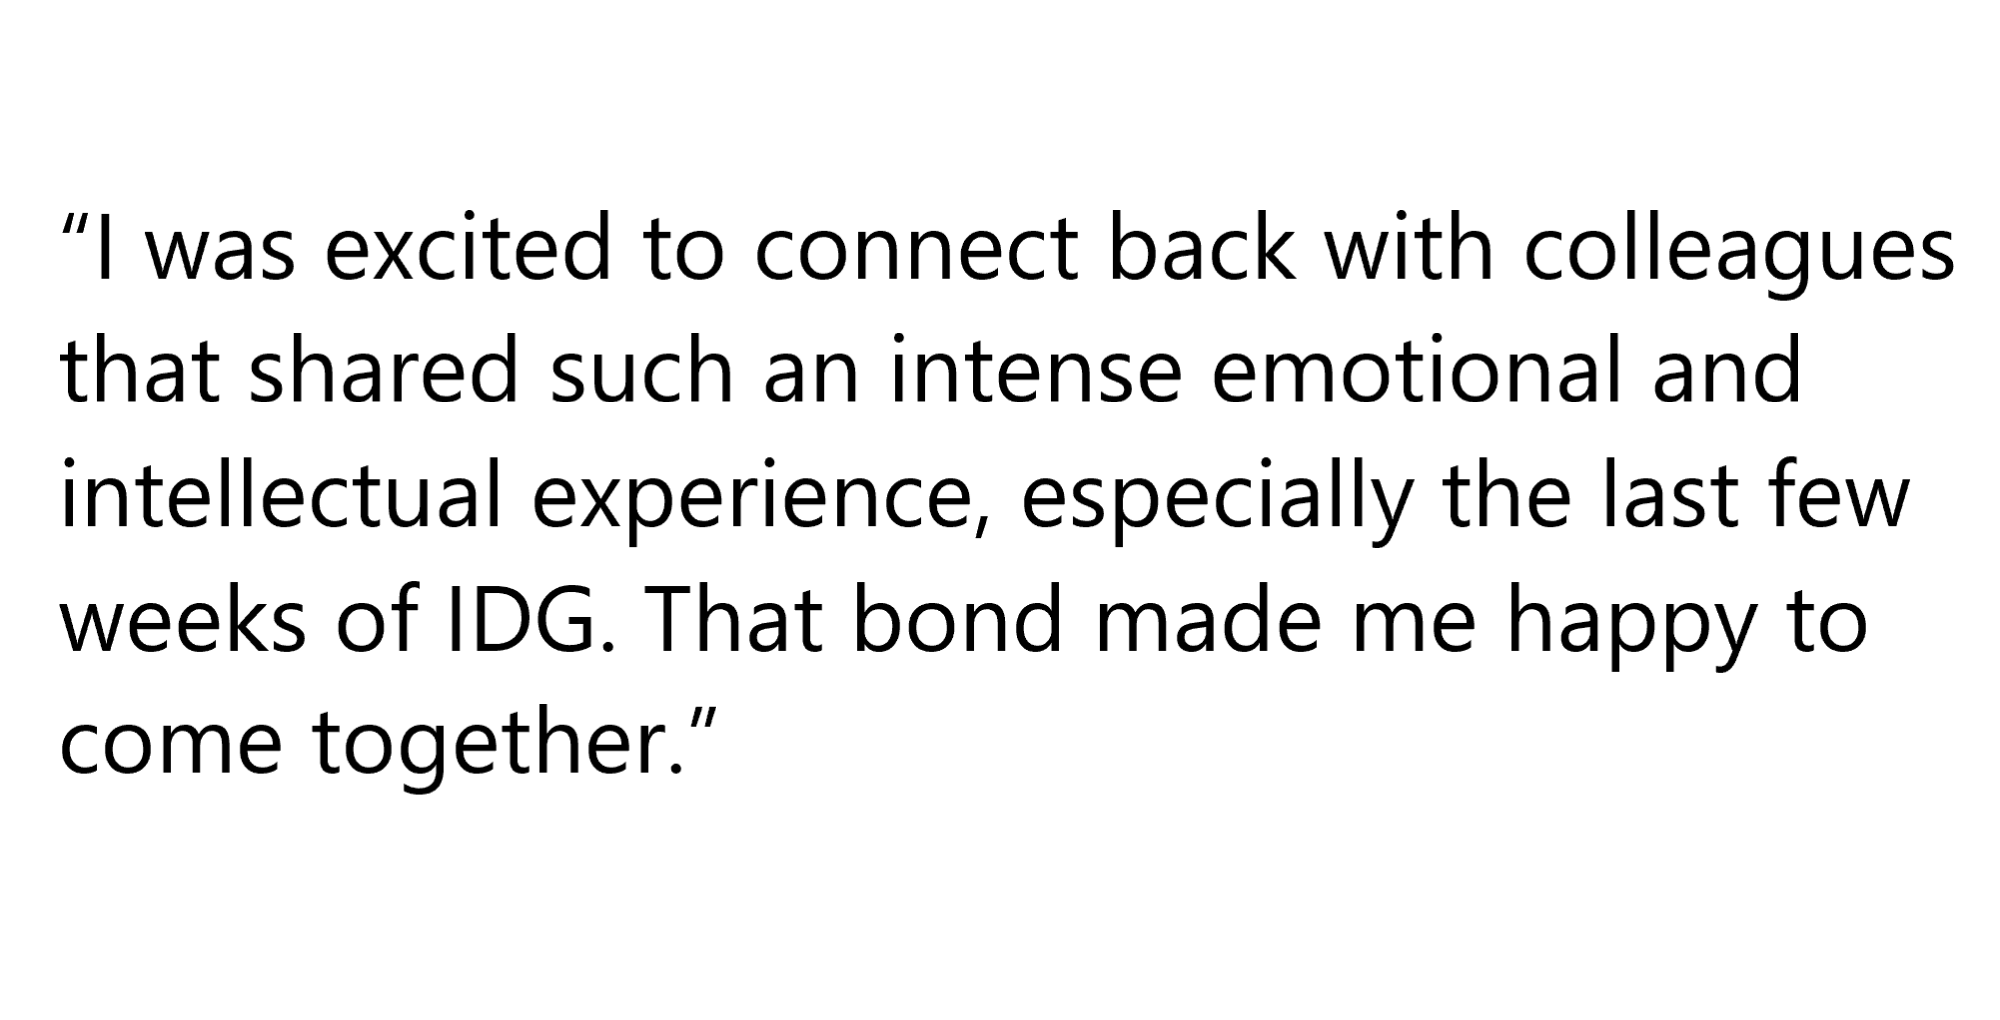 Quote from an IGD Alum: 'I was excited to connect back with colleagues that shared such an intense emotional and intellectual experience, especially the last few weeks of IDG. That bond made me happy to come together.'